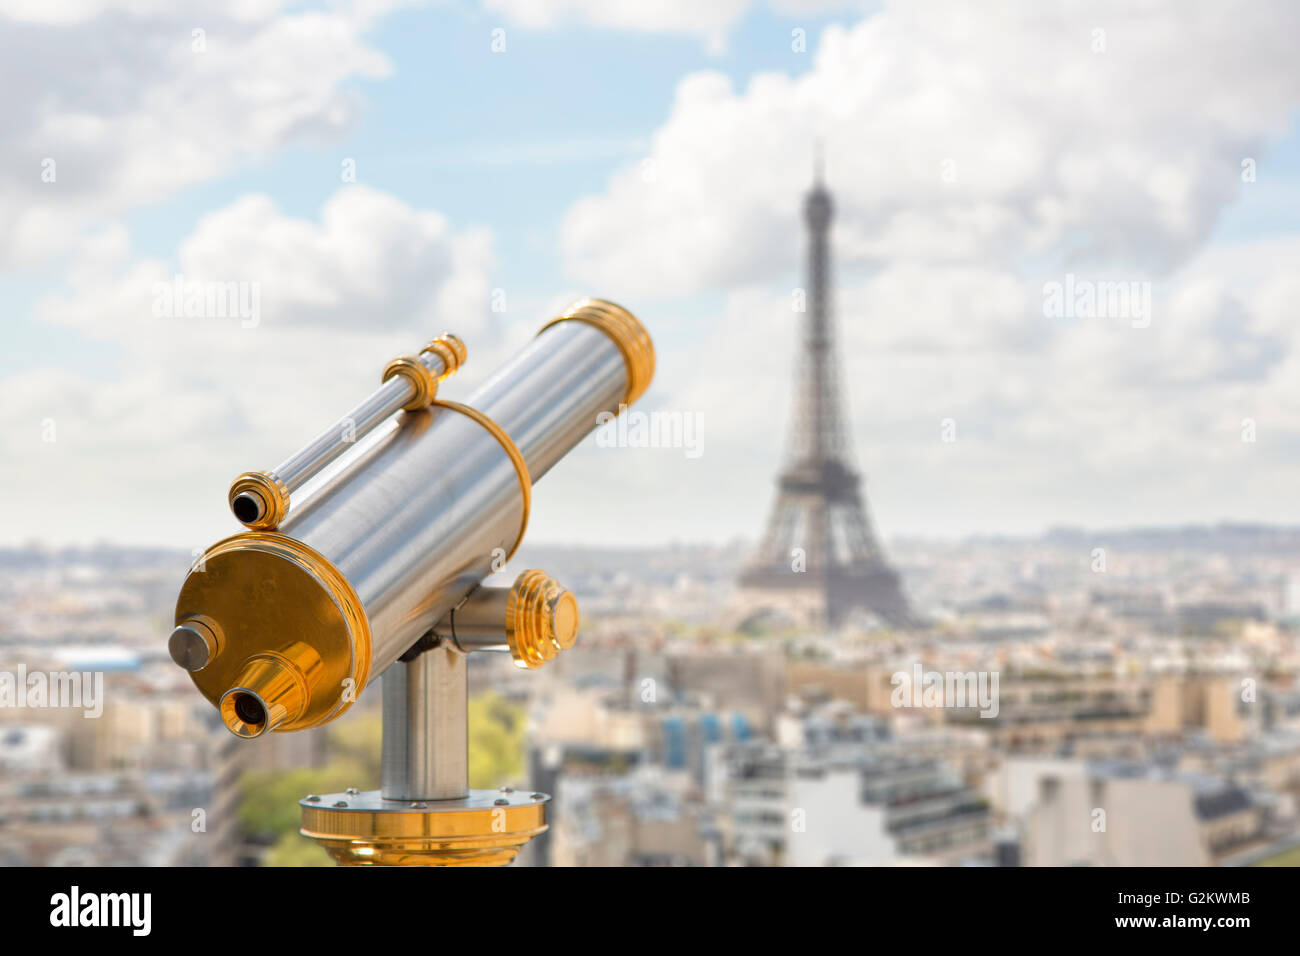 Over view of eiffel tower with monocular Stock Photo